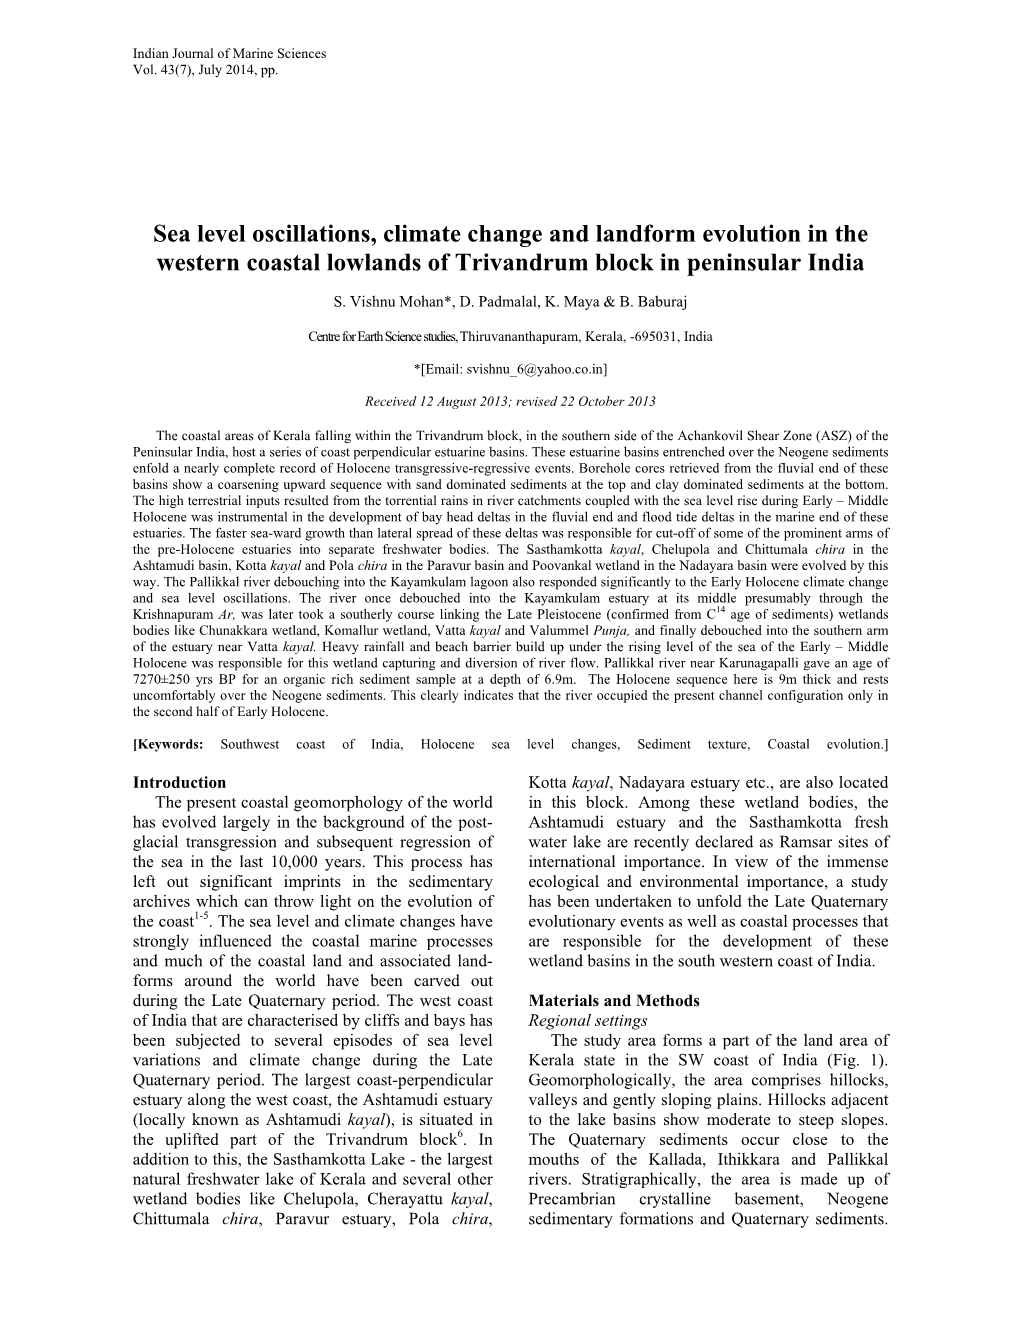 Sea Level Oscillations, Climate Change and Landform Evolution in the Western Coastal Lowlands of Trivandrum Block in Peninsular India